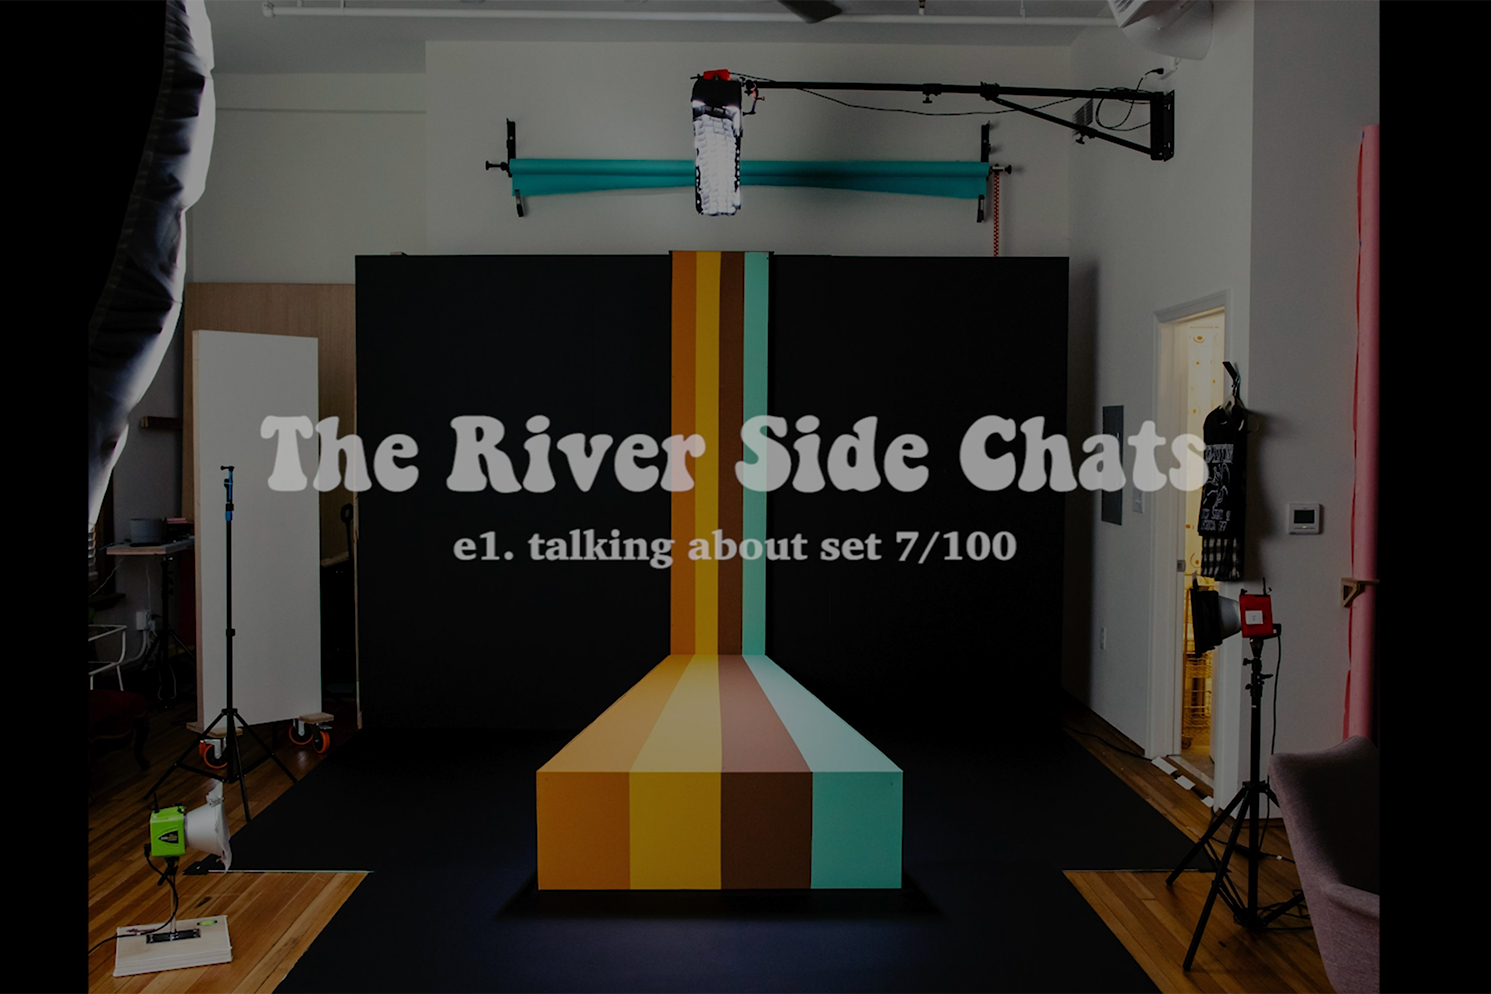 The River Side Chats - E1. Talking About Set 7/100 - Jada And David Parrish